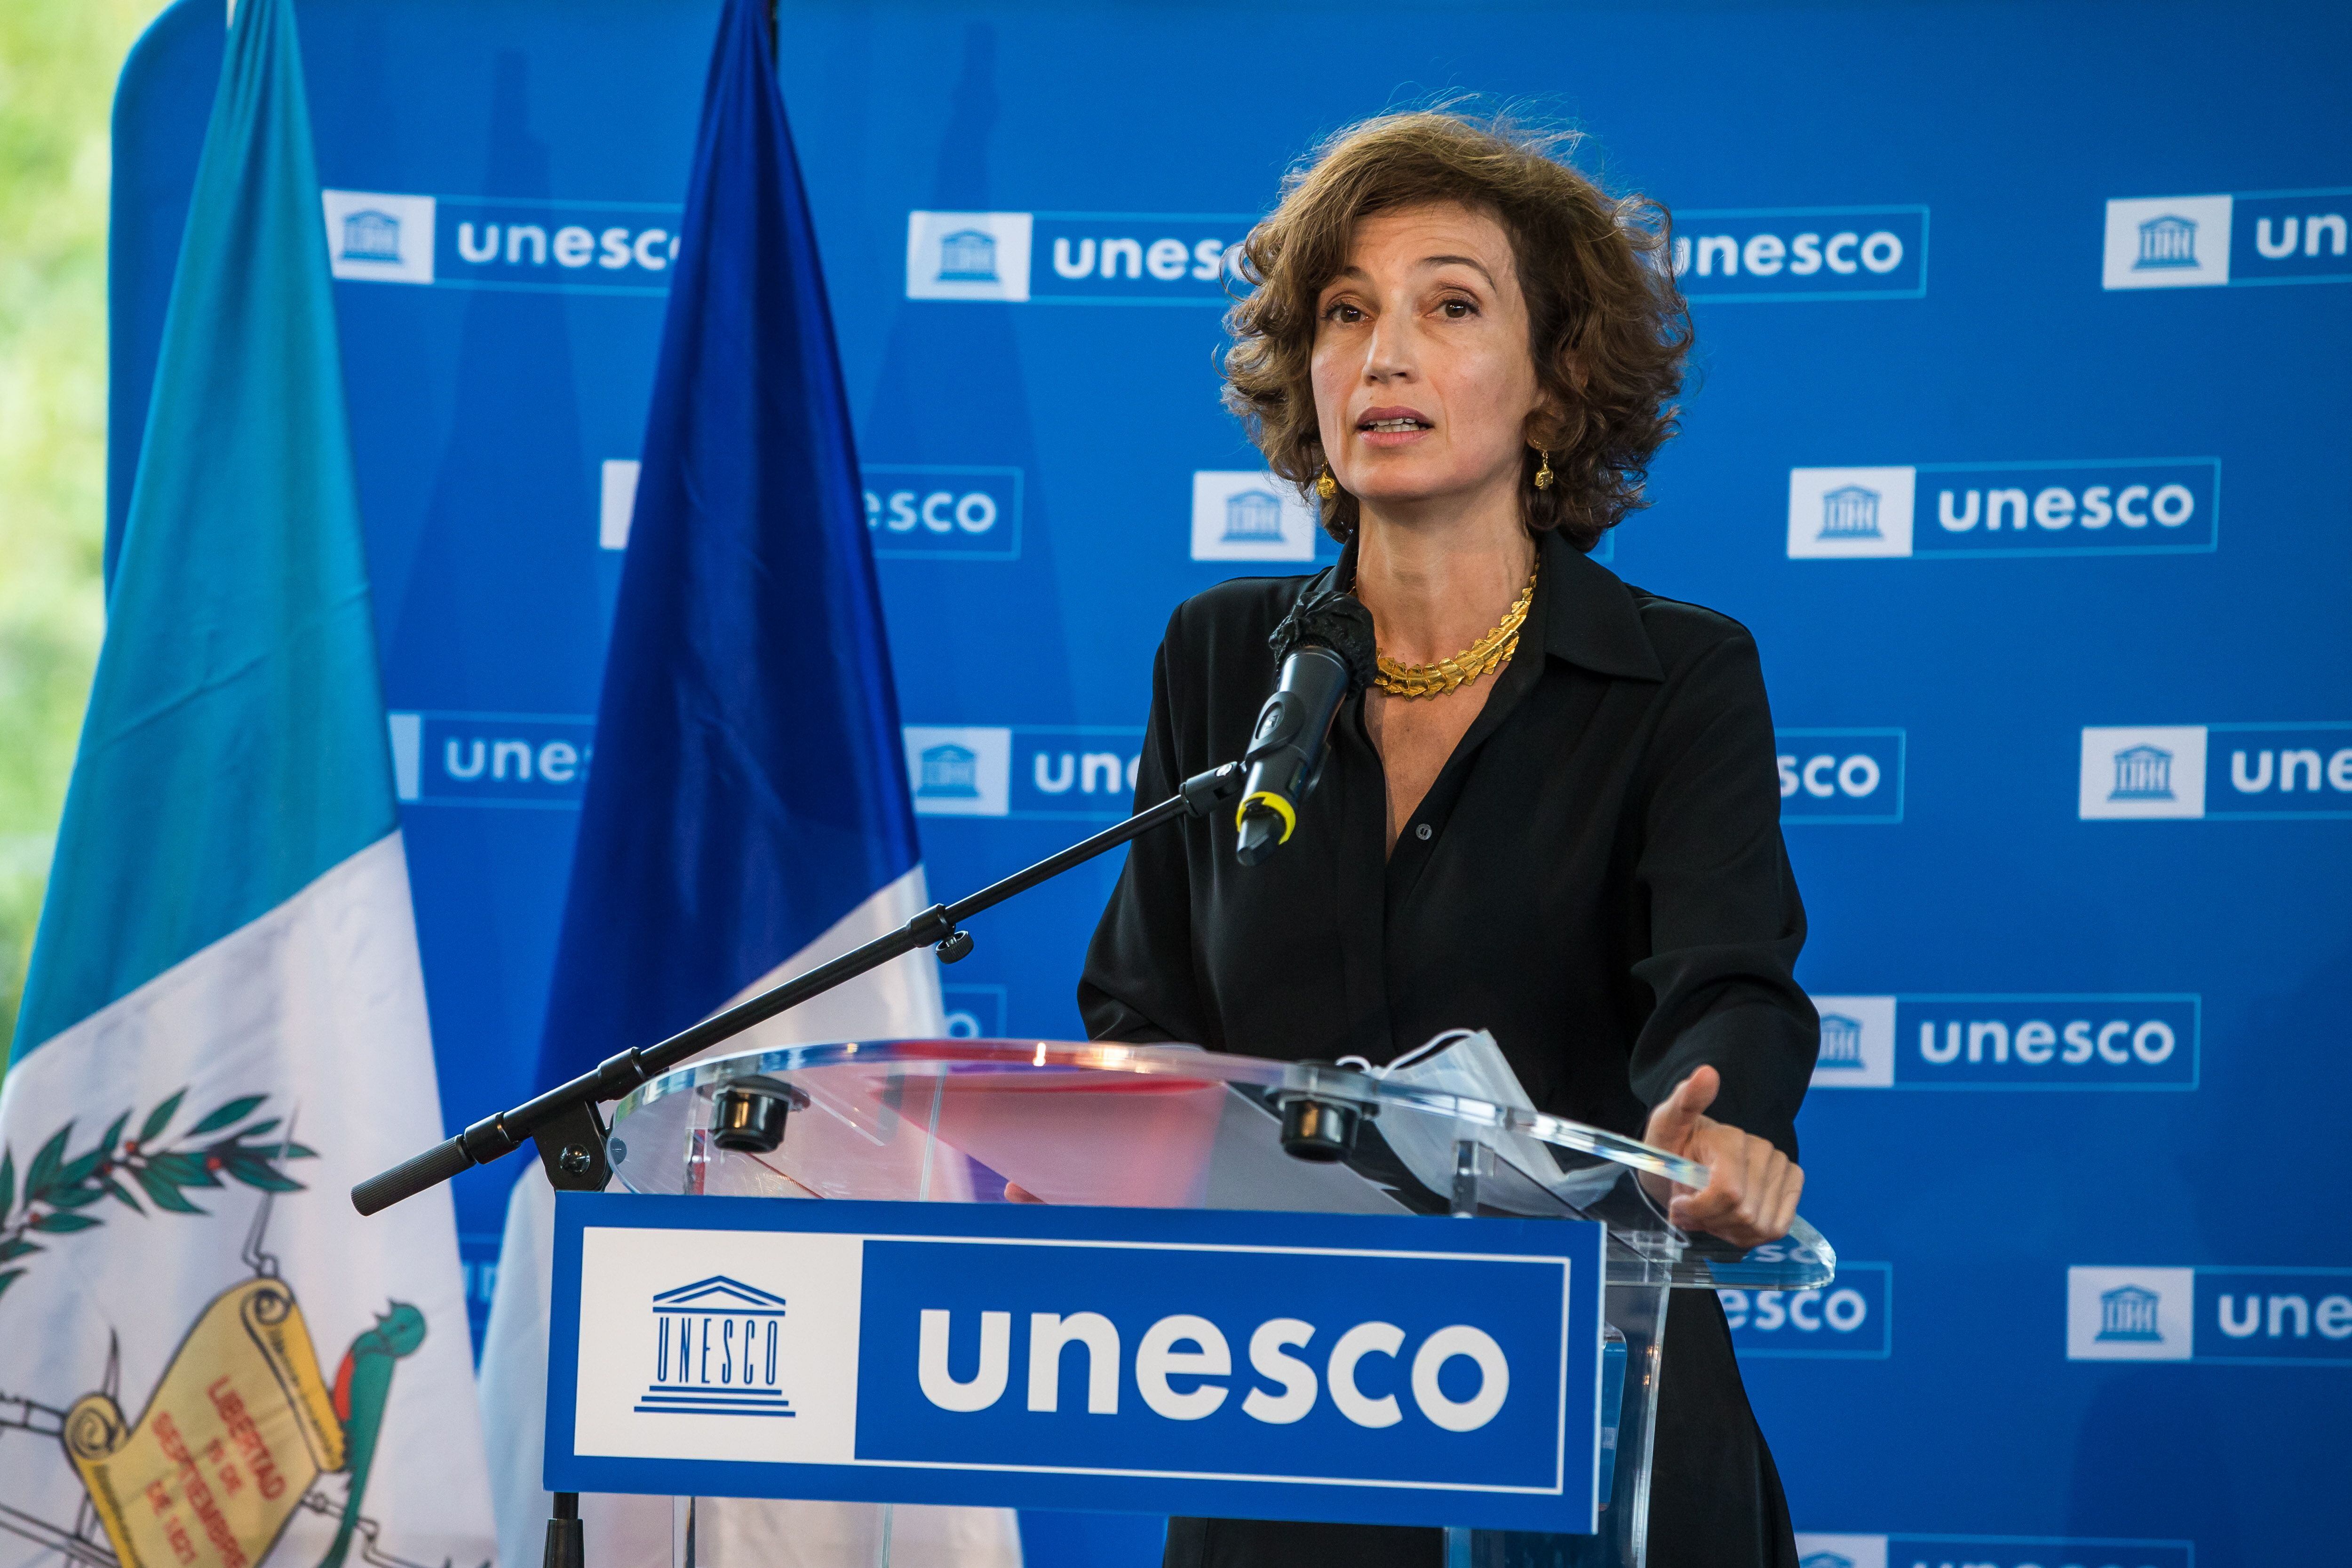 Archive image of Audrey Azoulay, Director General of UNESCO (EFE / EPA / CHRISTOPHE PETIT TESSON)
